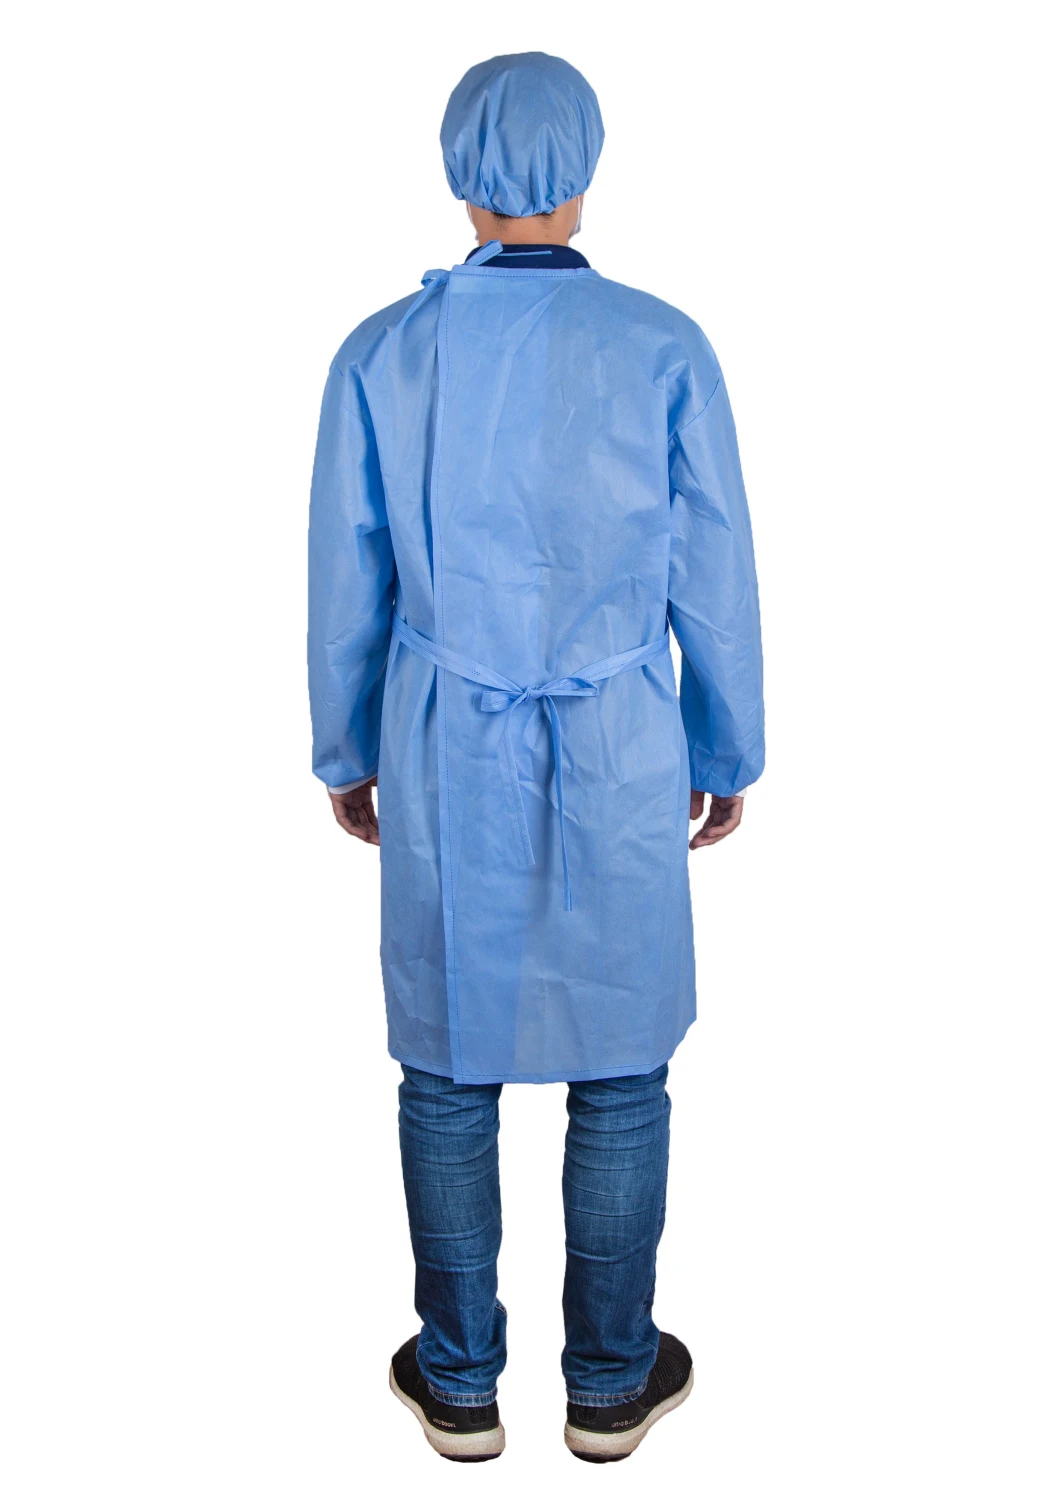 AAMI PB70 Level 1, Level 2, Level 3 Sterile Surgical Gown Reinforced